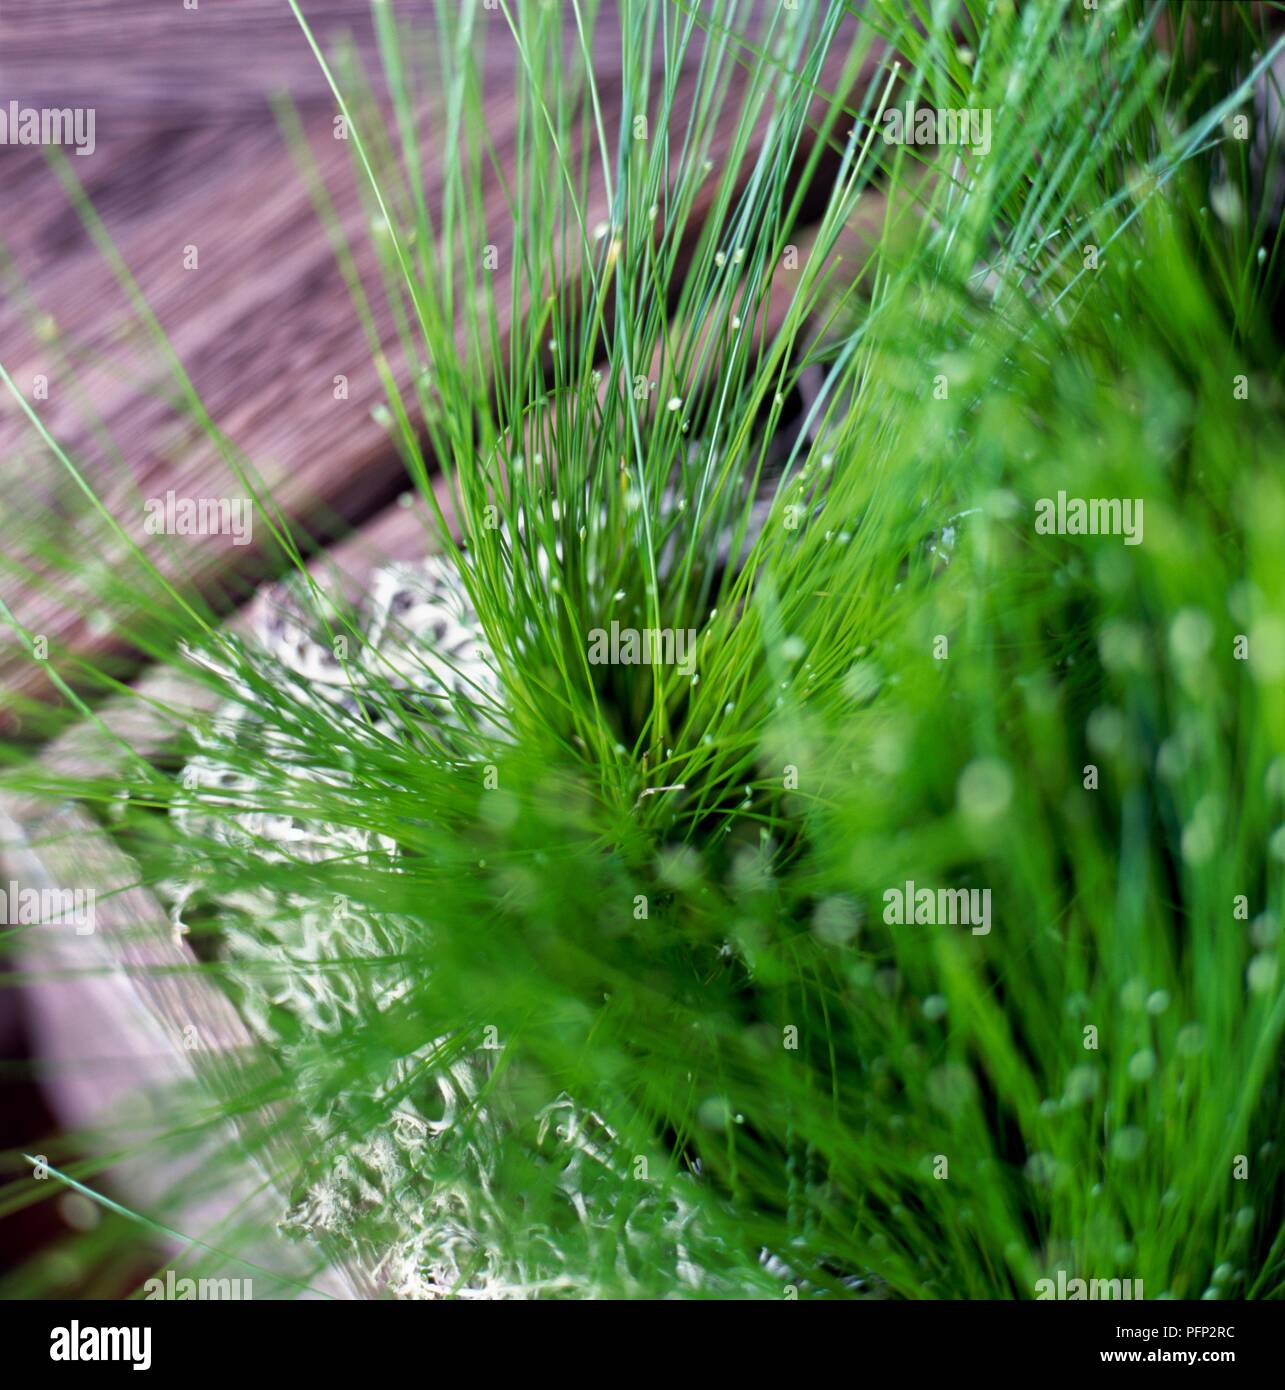 Isolepis cernua (Fibreoptic grass) in container indoors, close-up Stock Photo